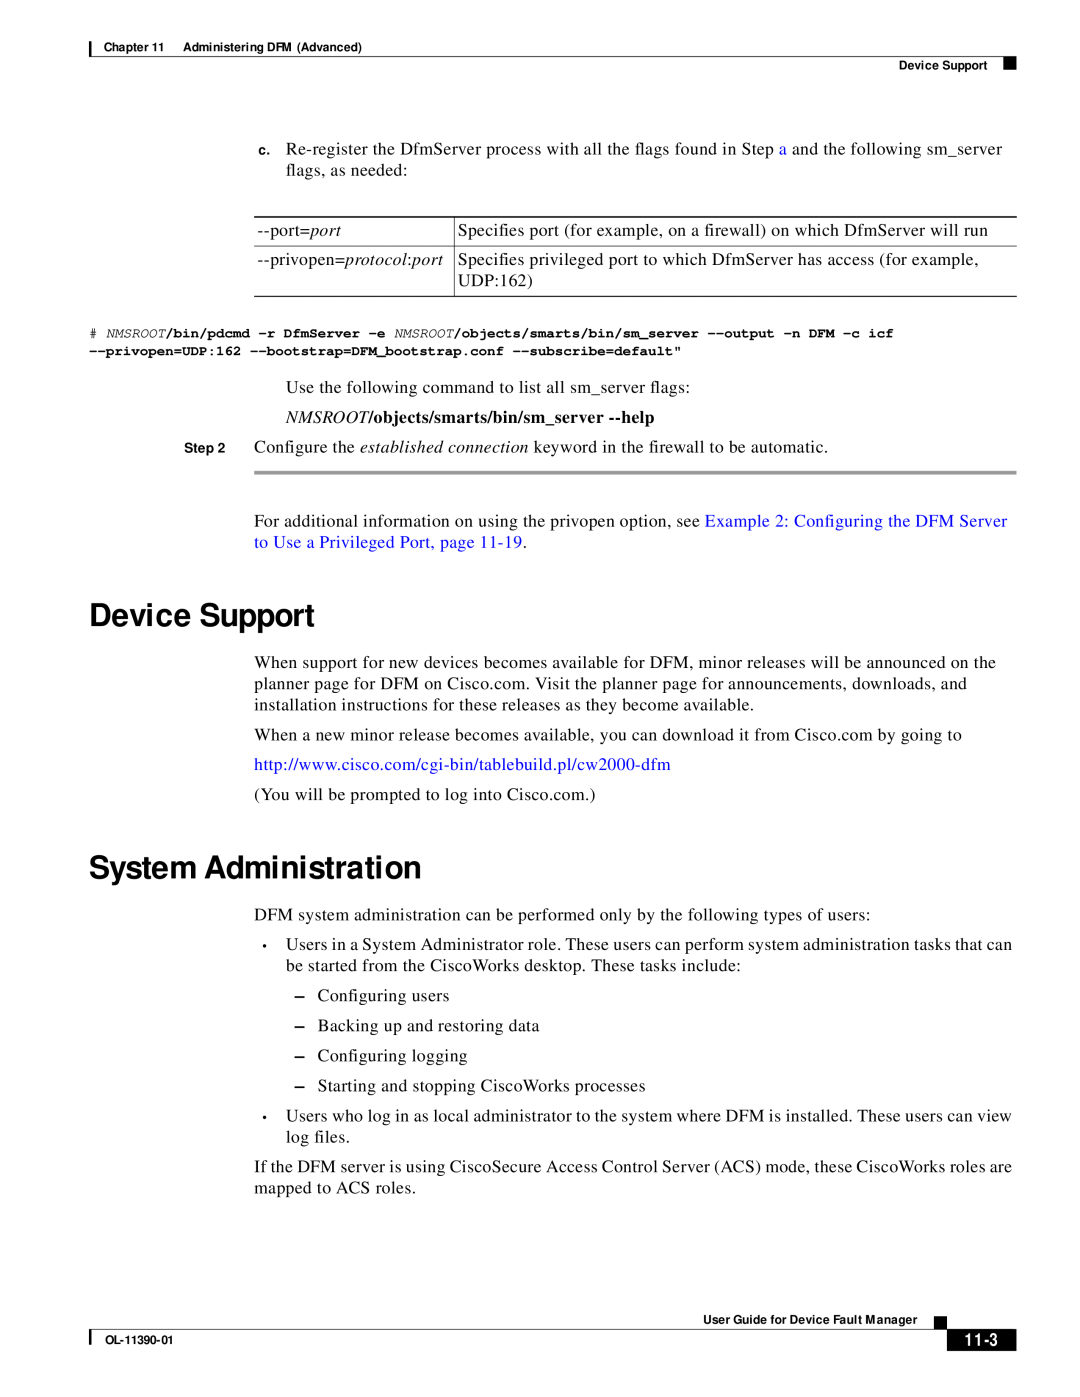 Cisco Systems OL-11390-01 manual Device Support, System Administration, NMSROOT/objects/smarts/bin/smserver --help, 11-3 